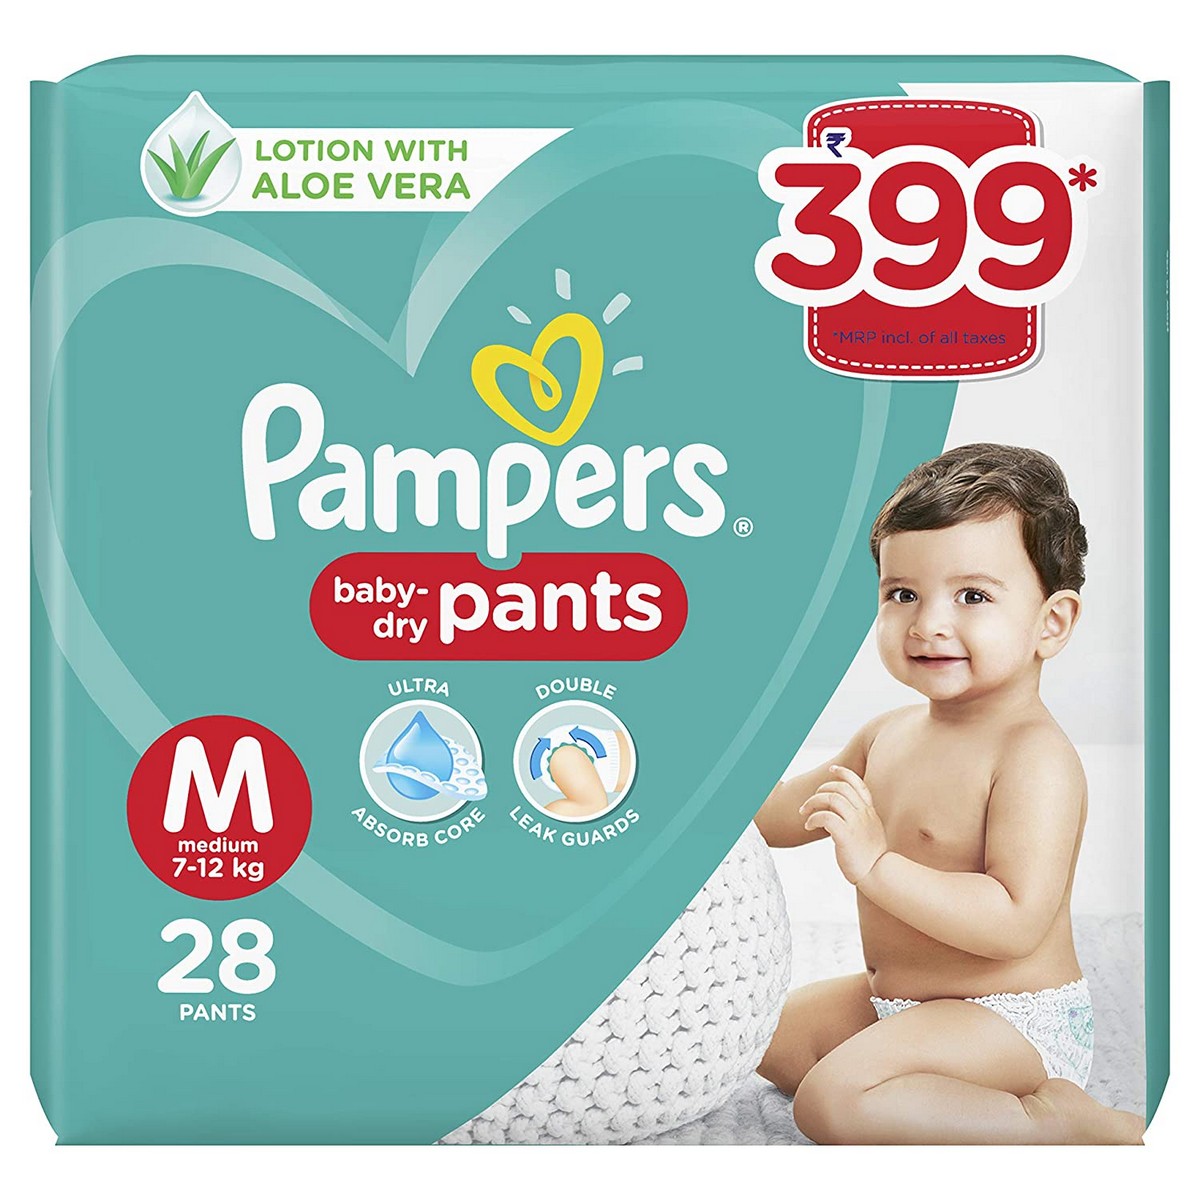 Pampers All round Protection Pants, Medium Size Baby Diapers (28 Count)